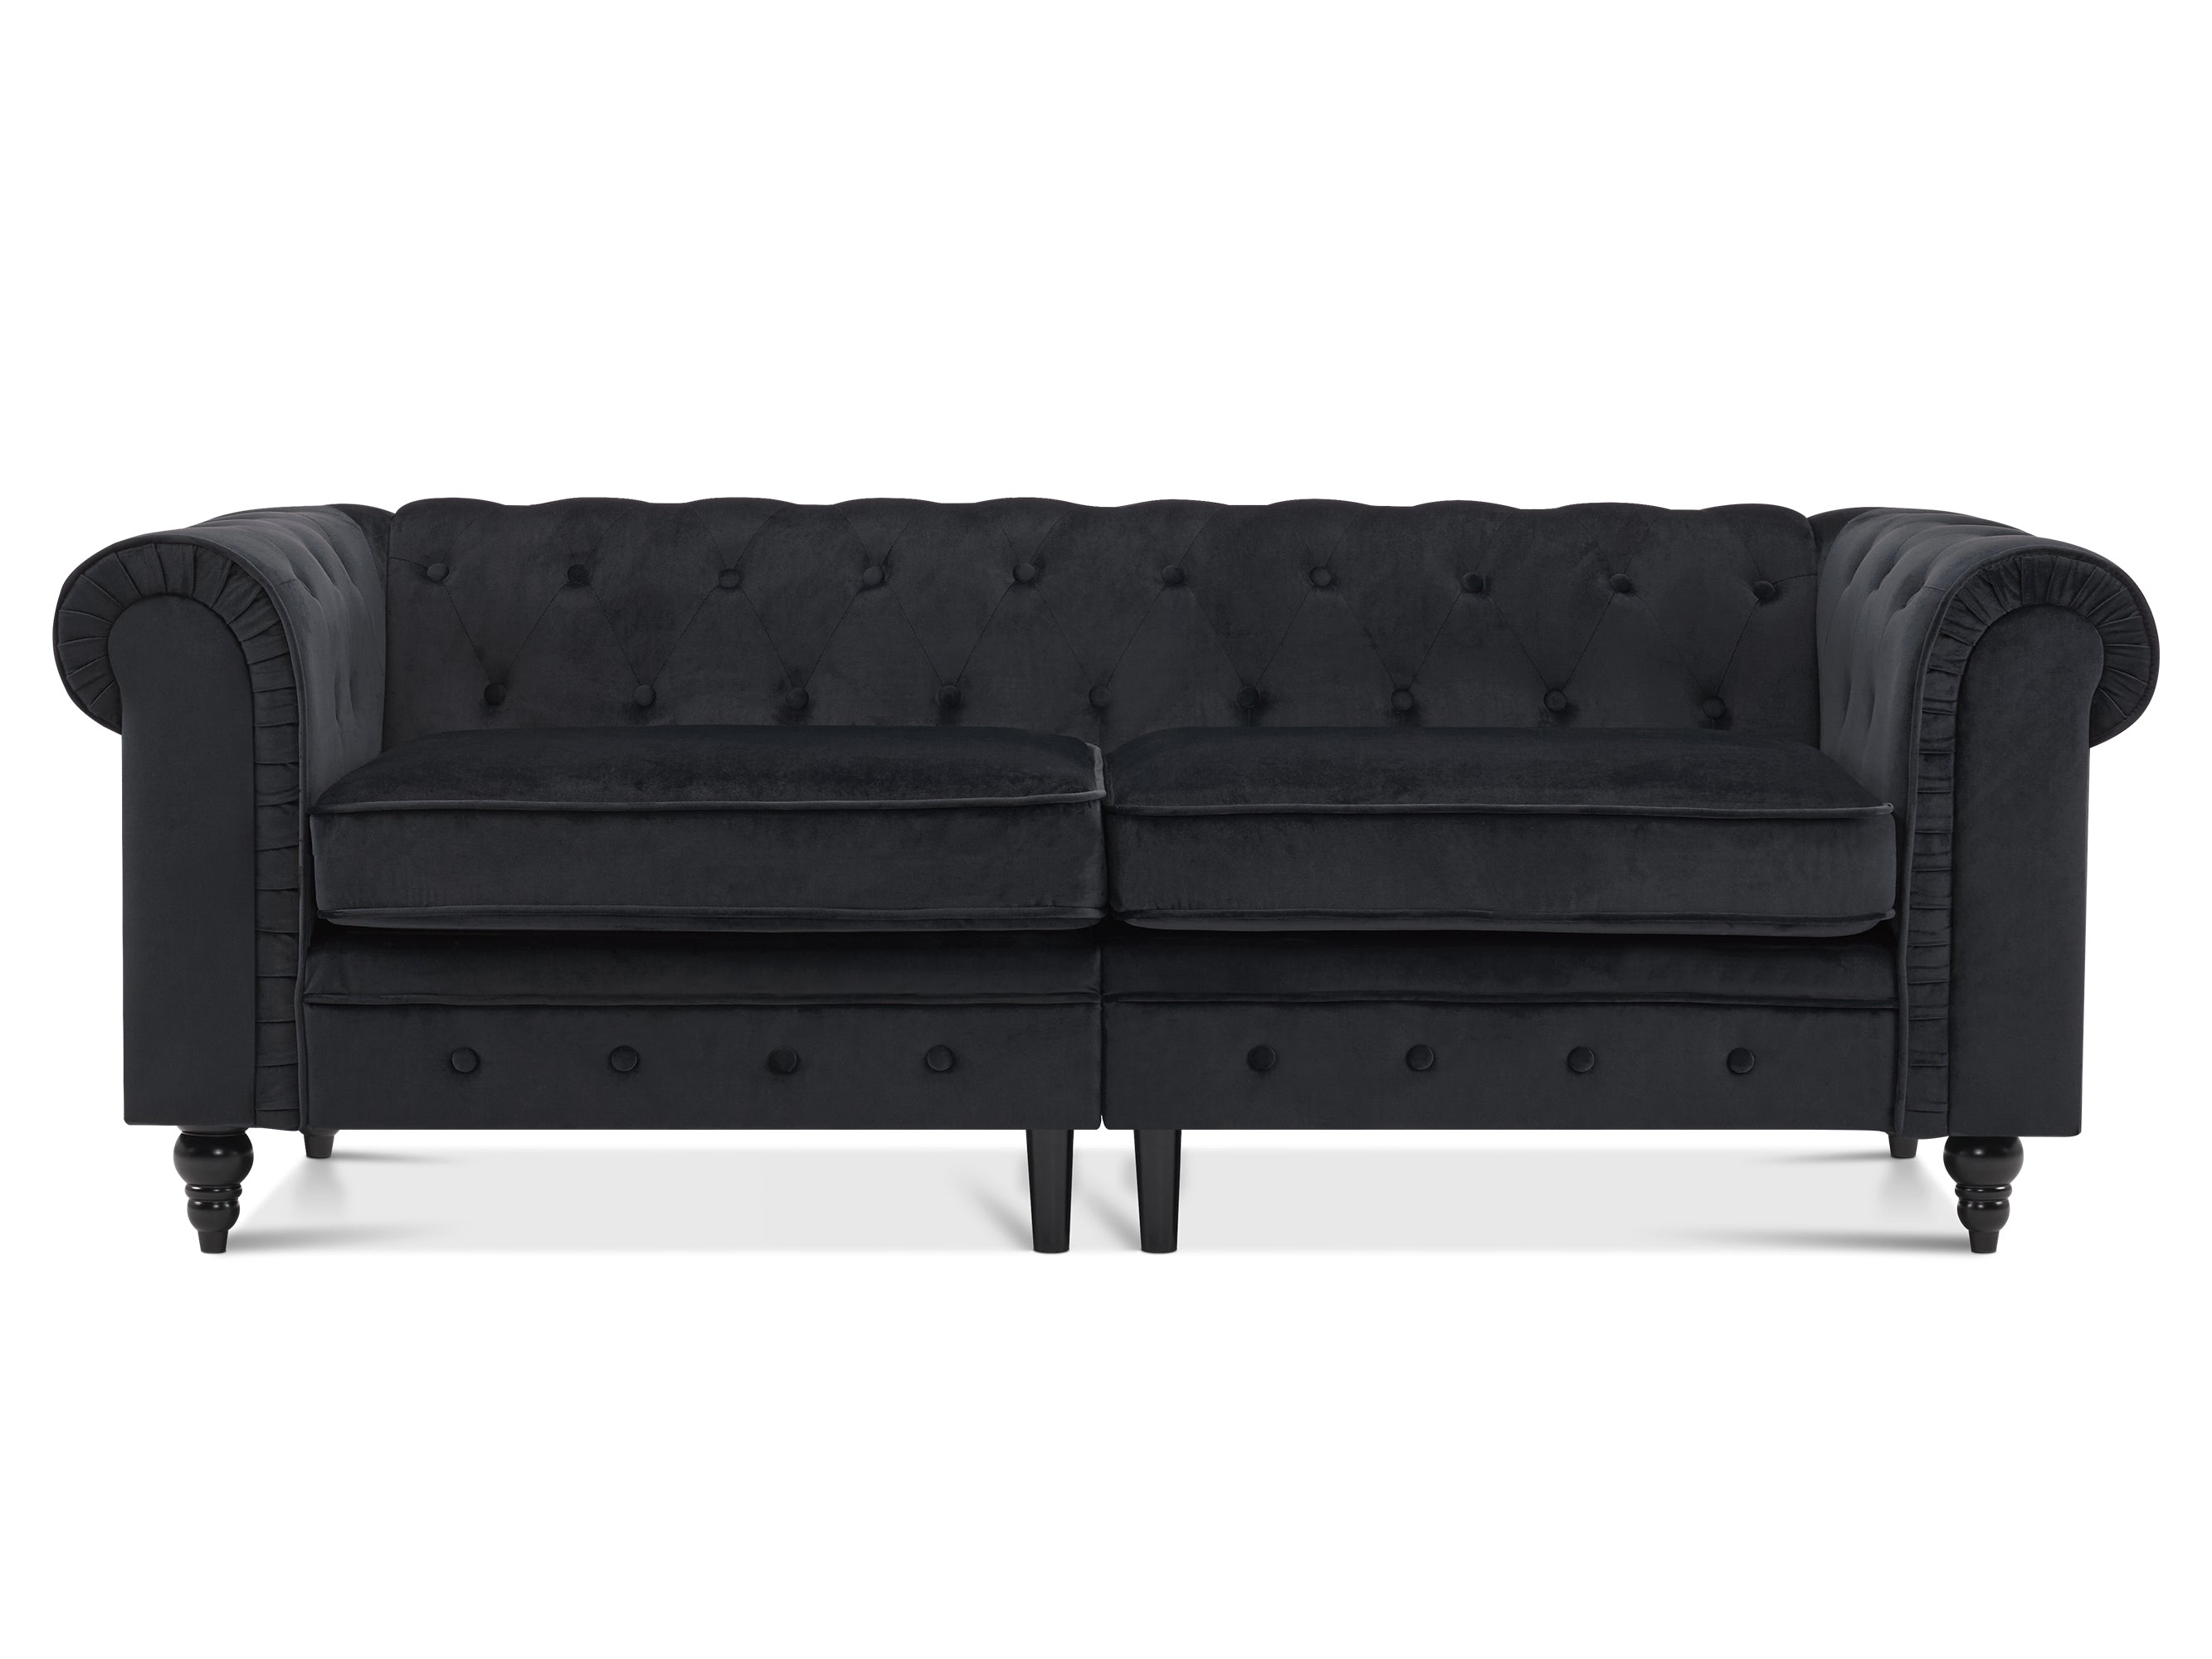 ivinta Small Office Sofa, Black Velvet Tufting Chesterfield Sofa, Mid Century Vintage Couch for Small Spaces Living Room Bedroom